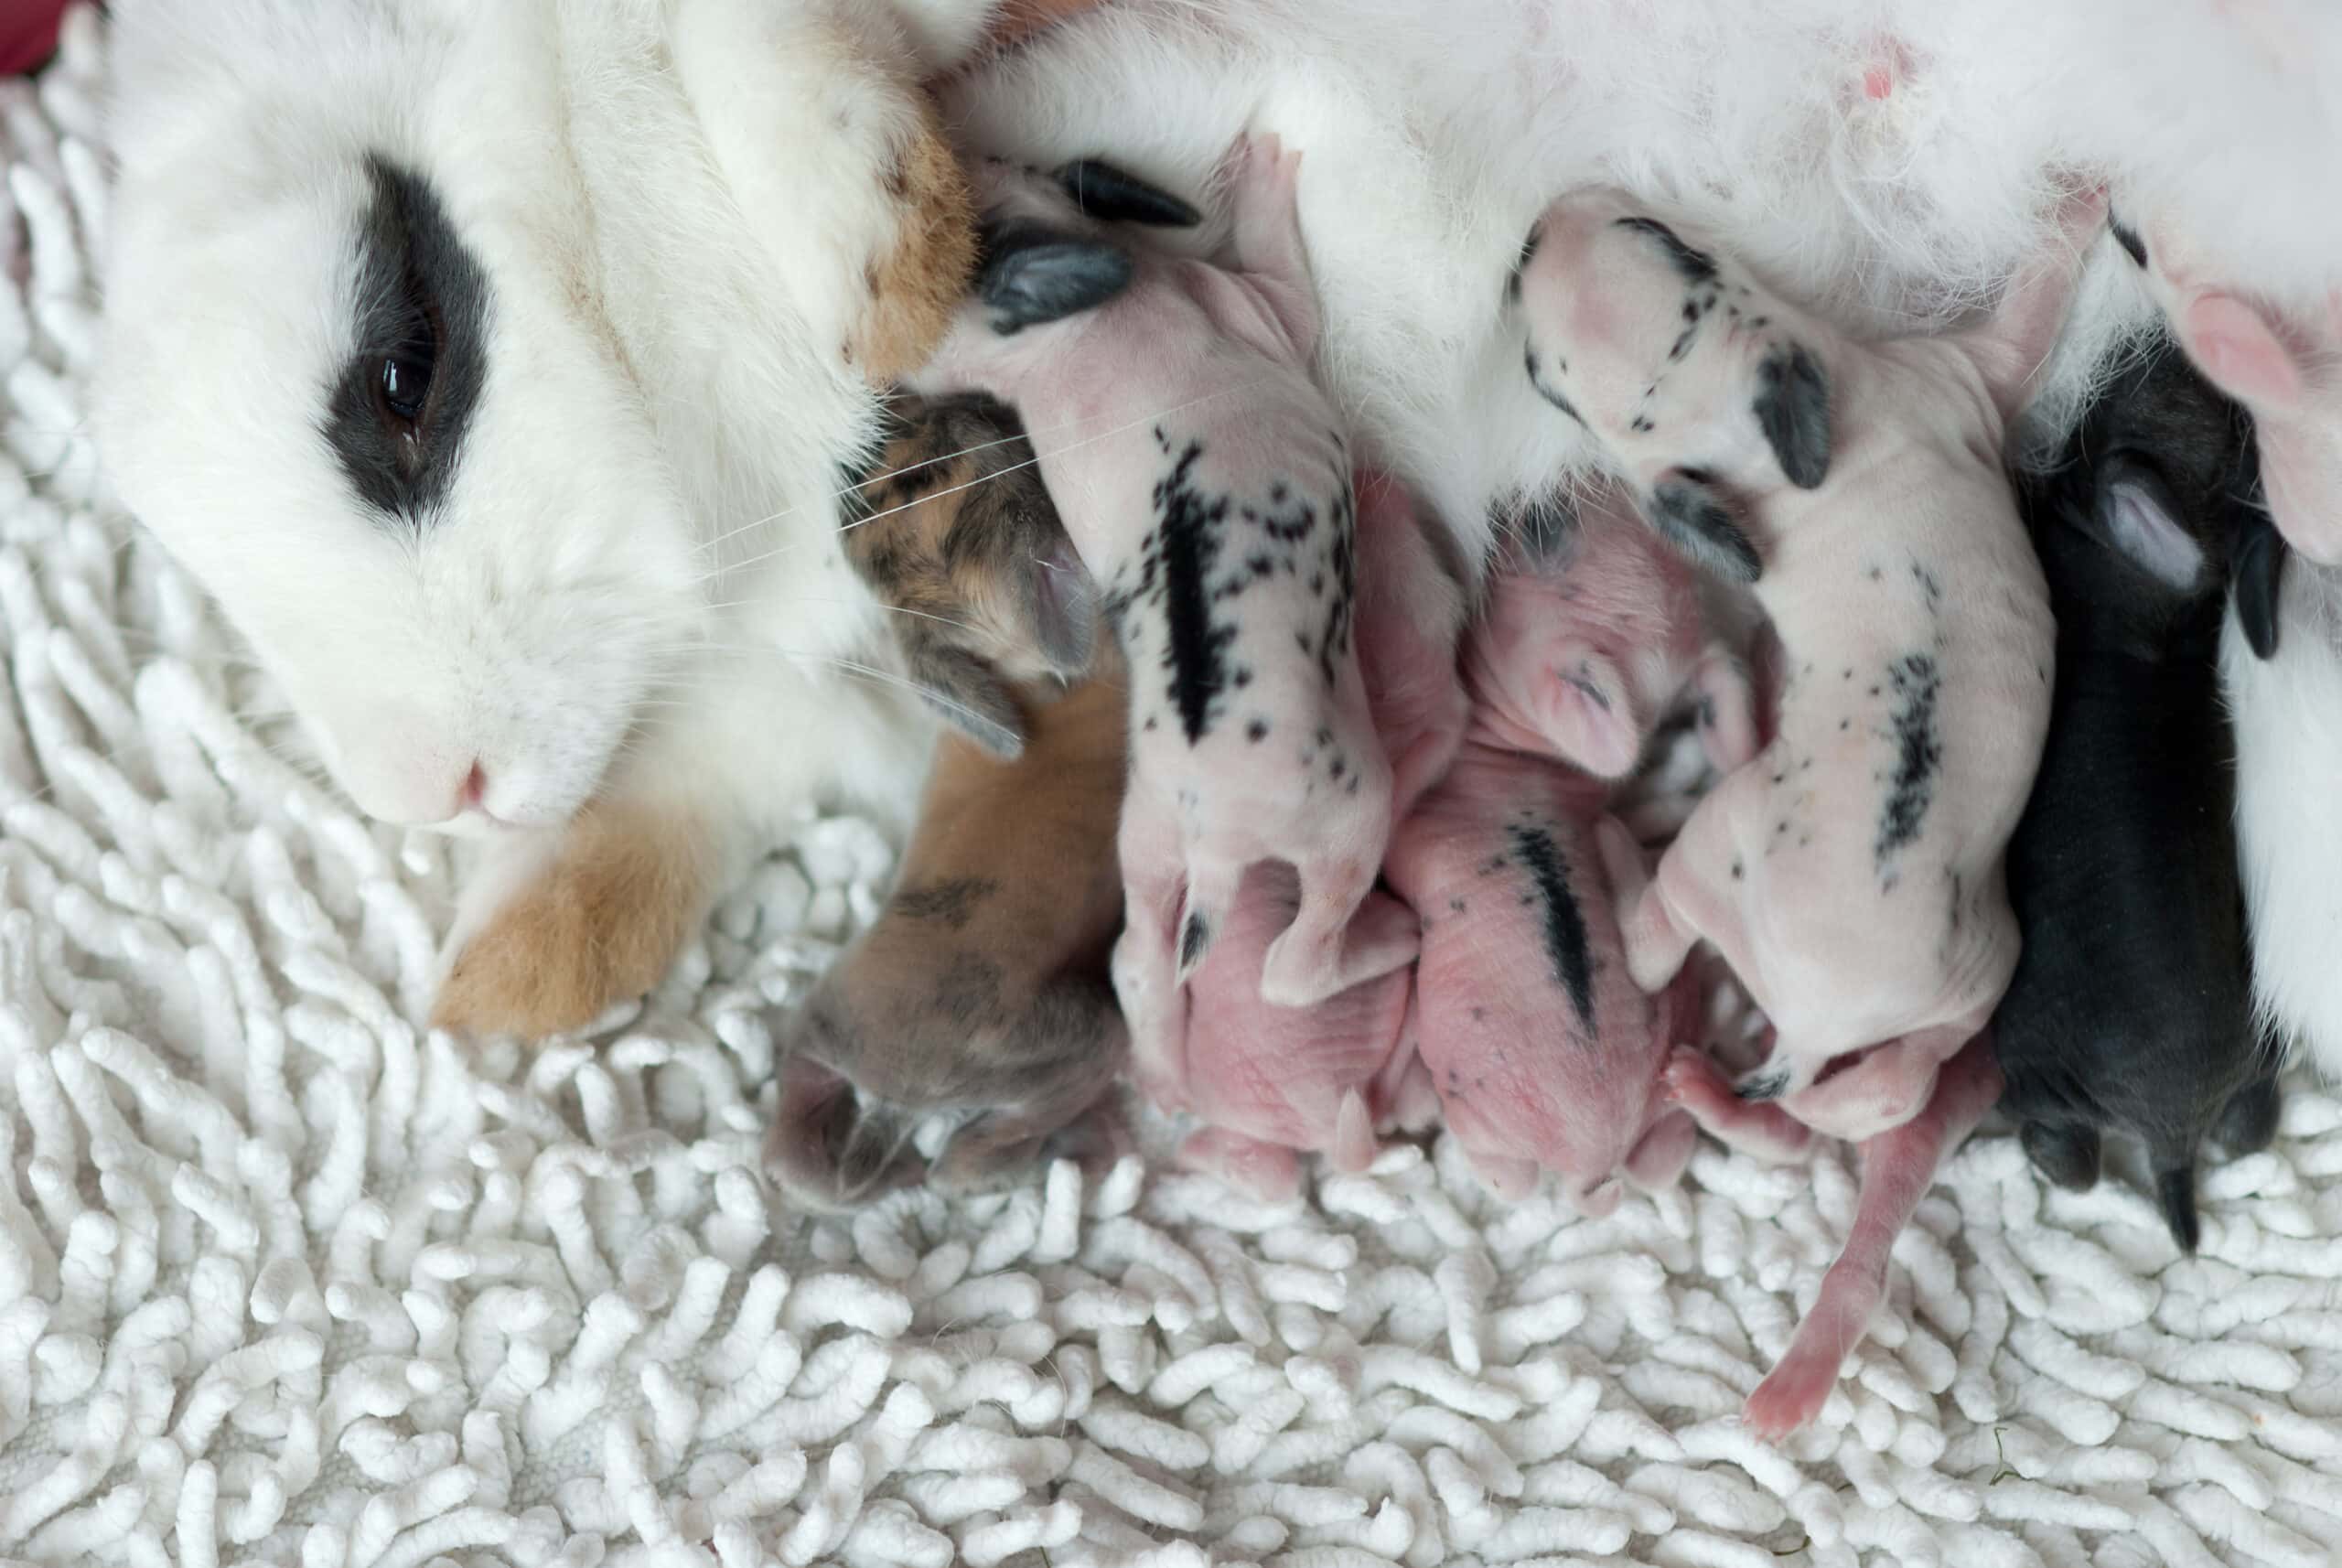 Baby Bunnies With Mother Rabbit